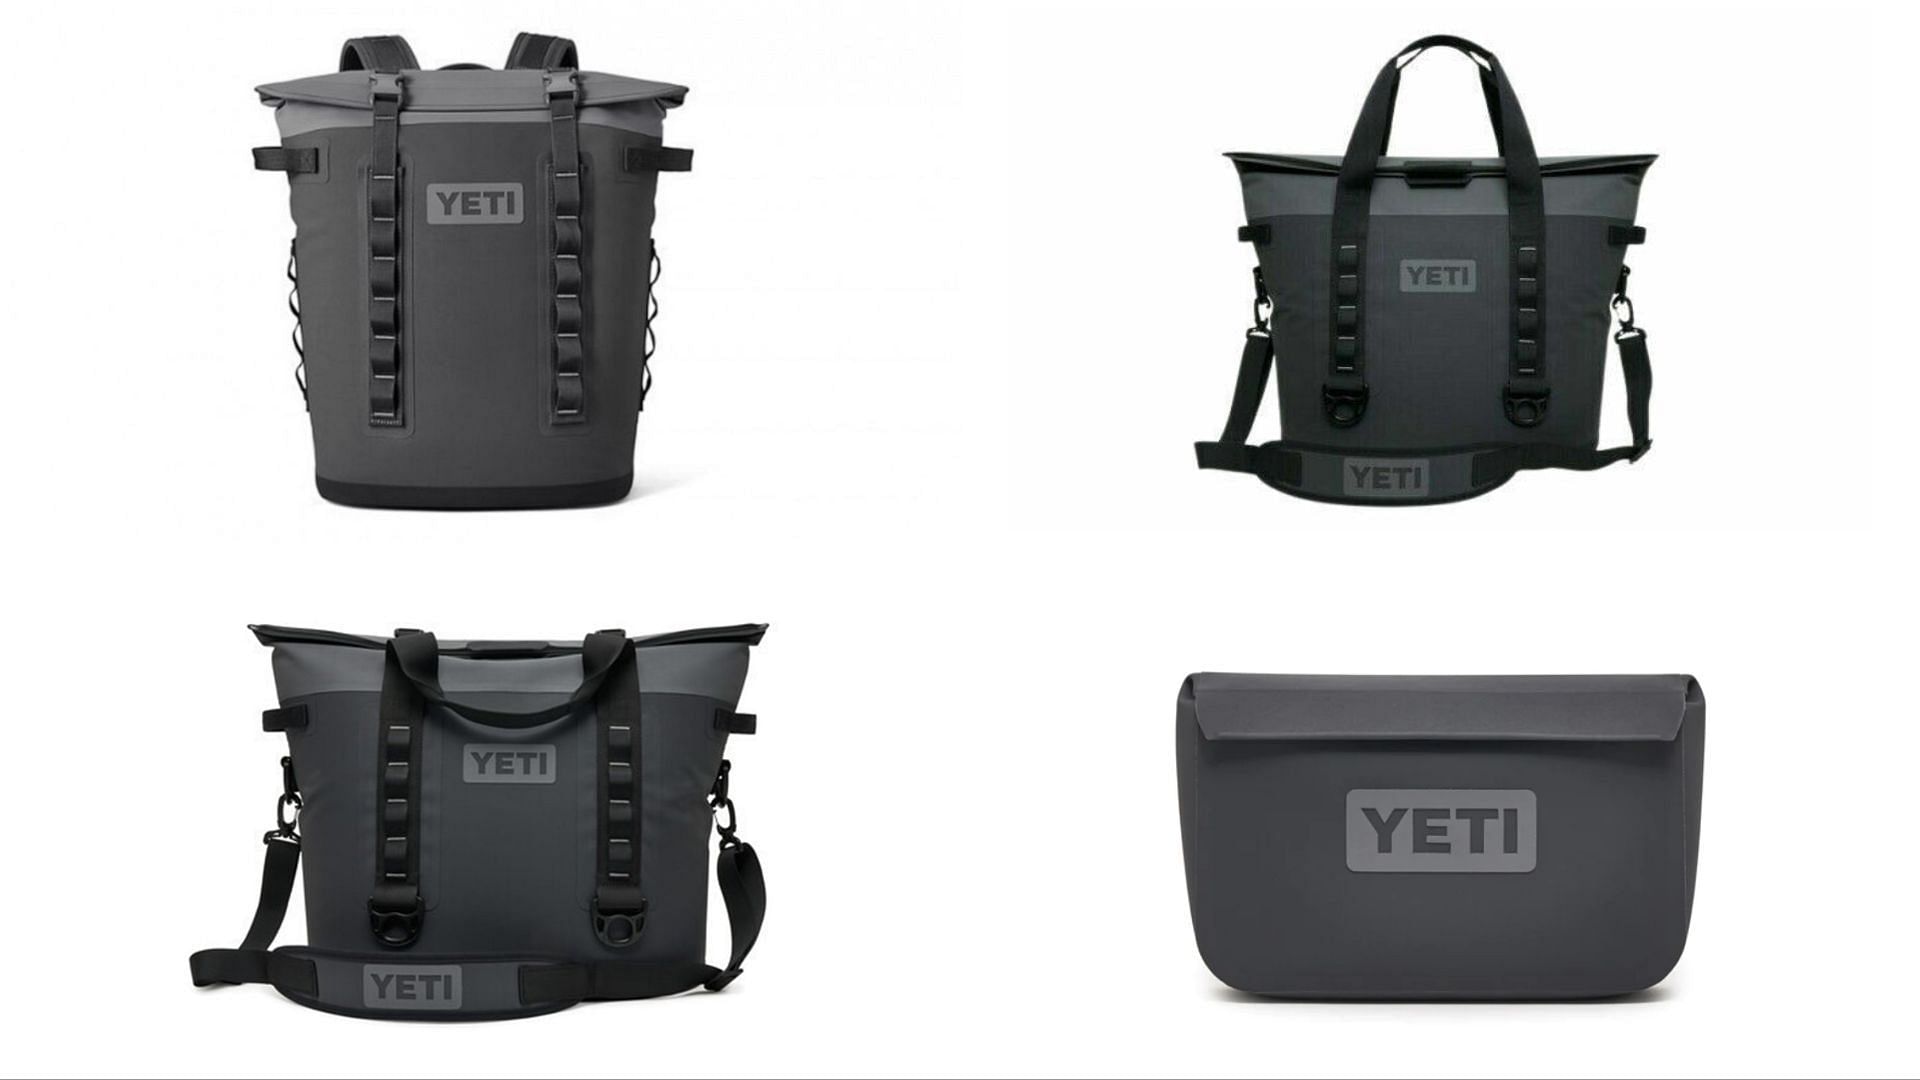 YETI recalls 2 million coolers and cases